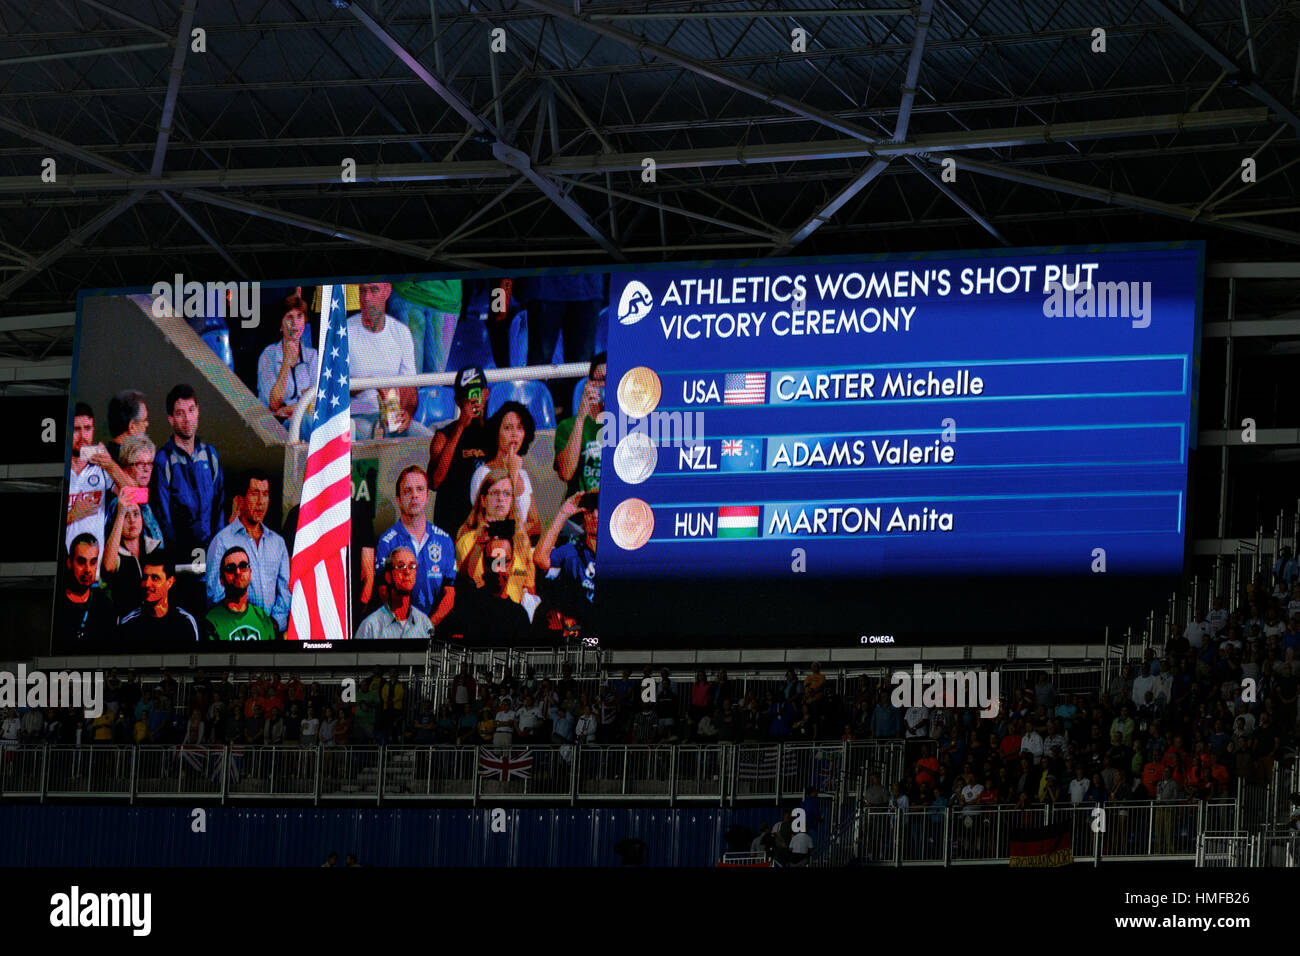 Rio de Janeiro, Brazil. 13 August 2016.  Video board showing Michelle Carter (USA) gold medal winner in the Women's  shot put at the 2016 Olympic Summ Stock Photo